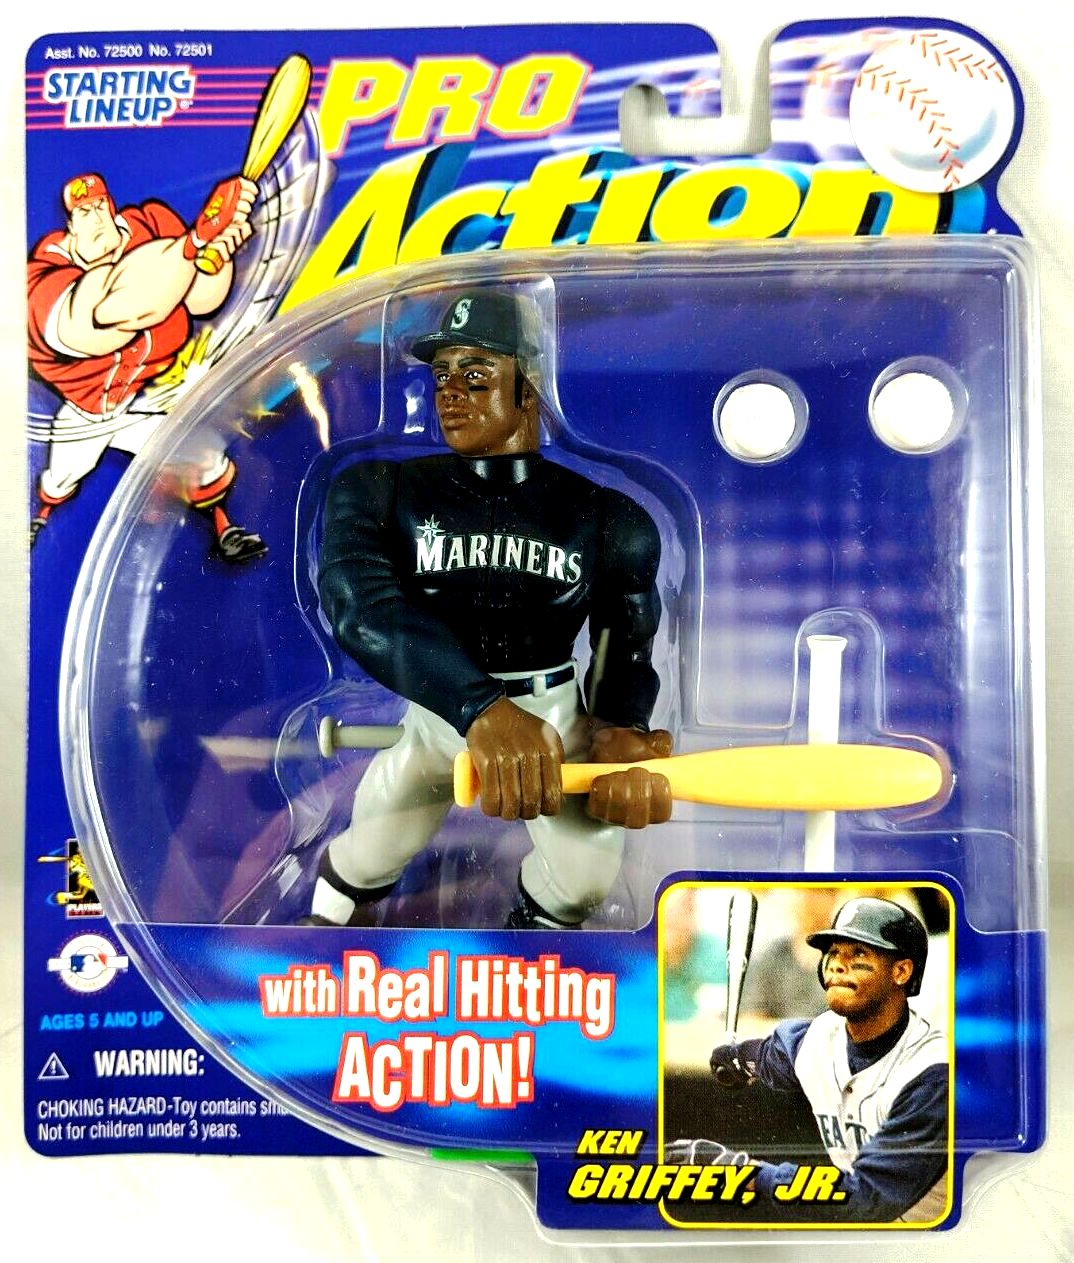 1998 Starting Lineup Pro Action Ken Griffey Jr Seattle Mariners Baseball Figure for sale online 